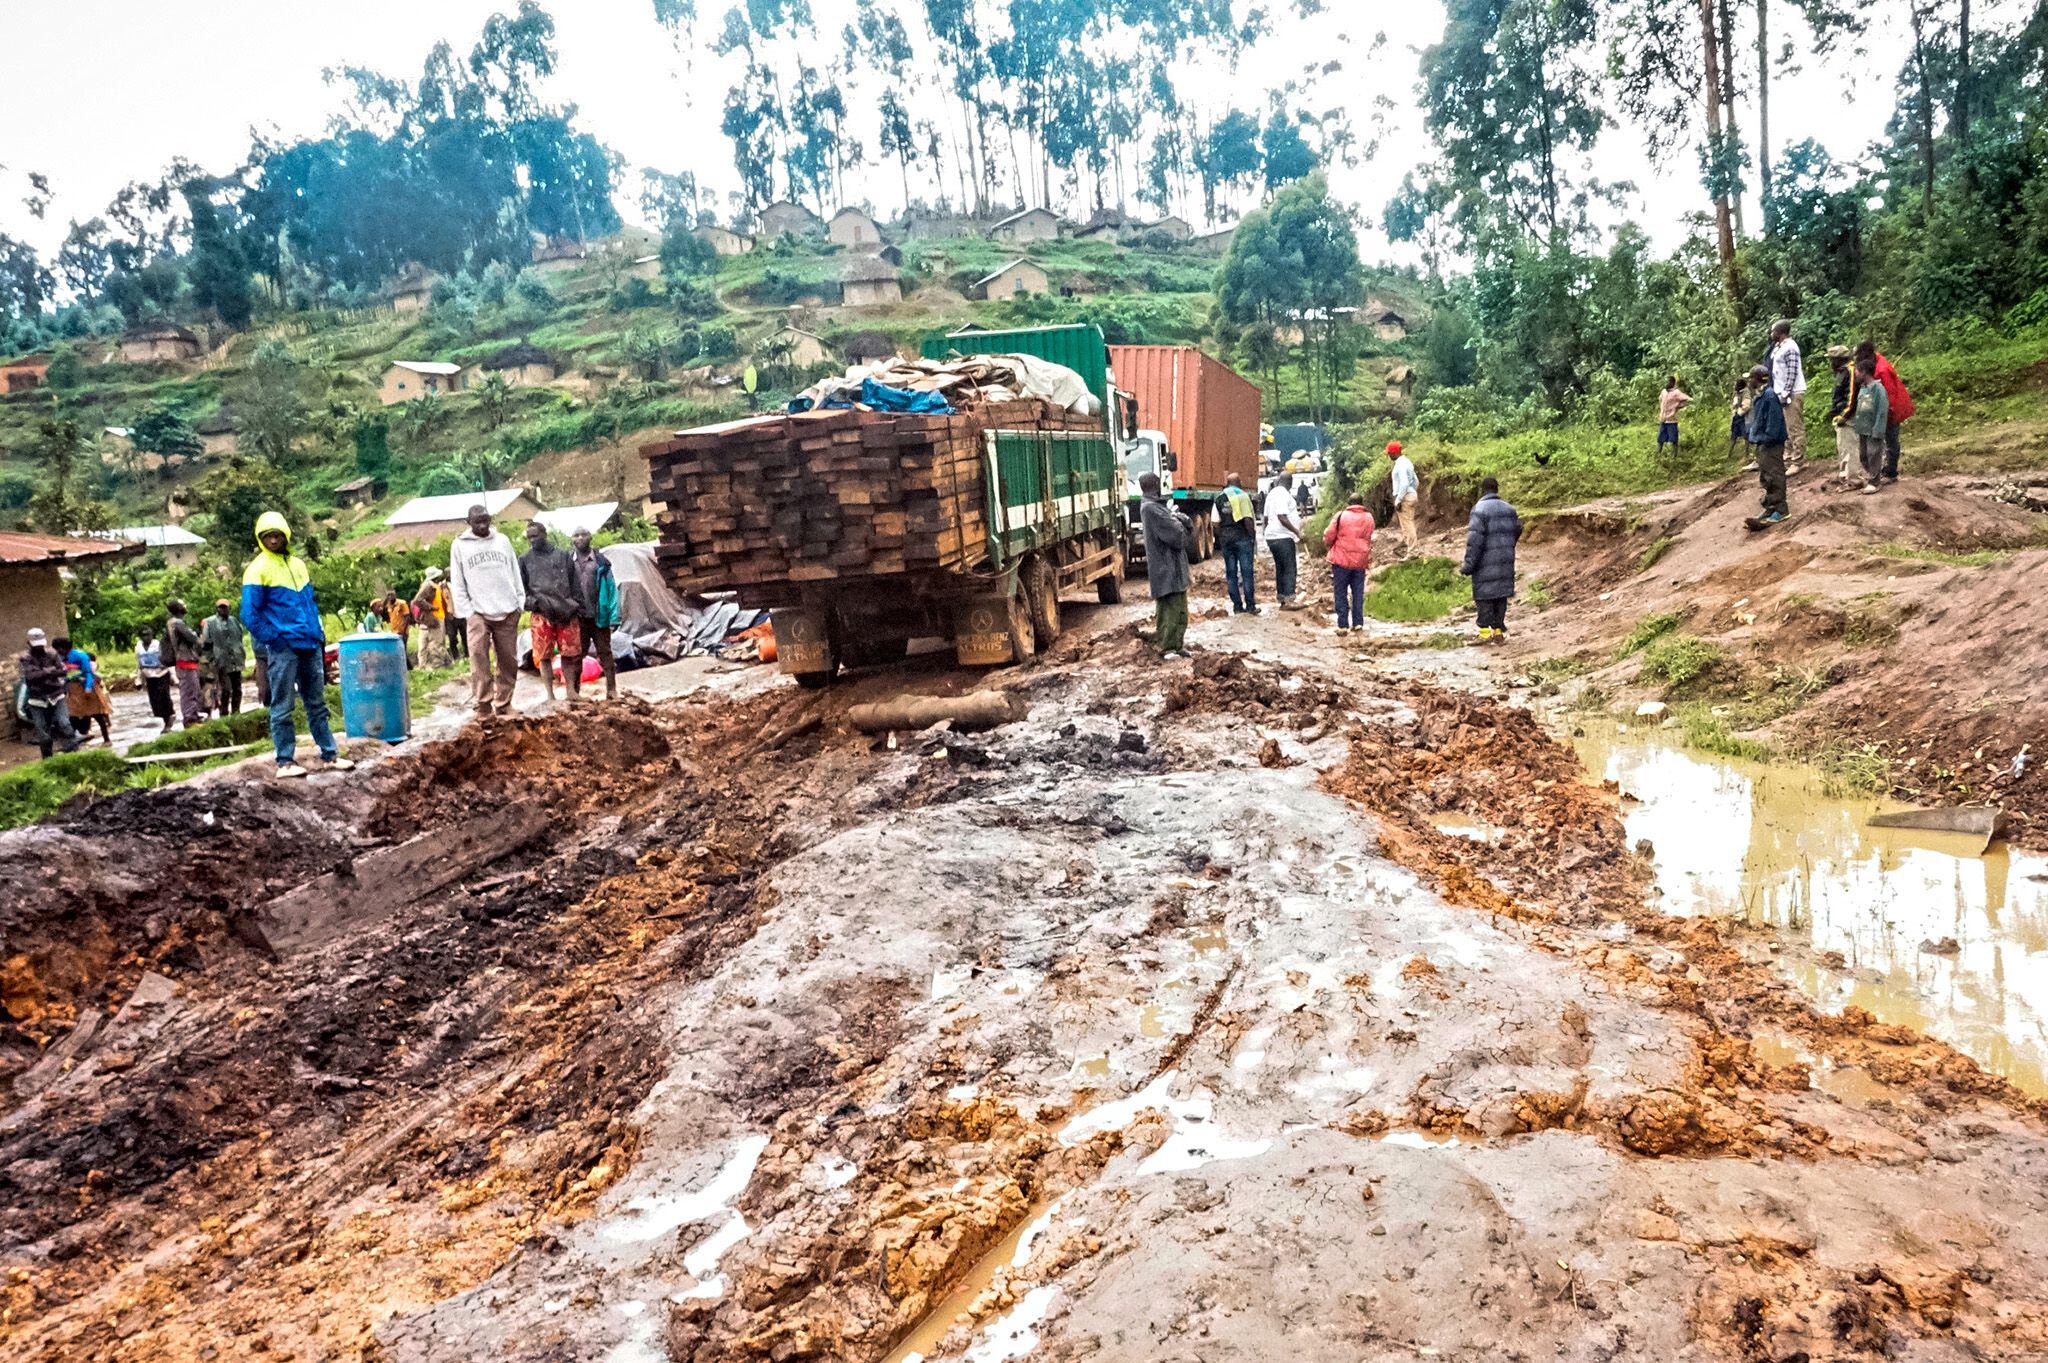 During the rainy season, the Butembo-Beni Road washes out, leaving cars and trucks stranded for days at a time